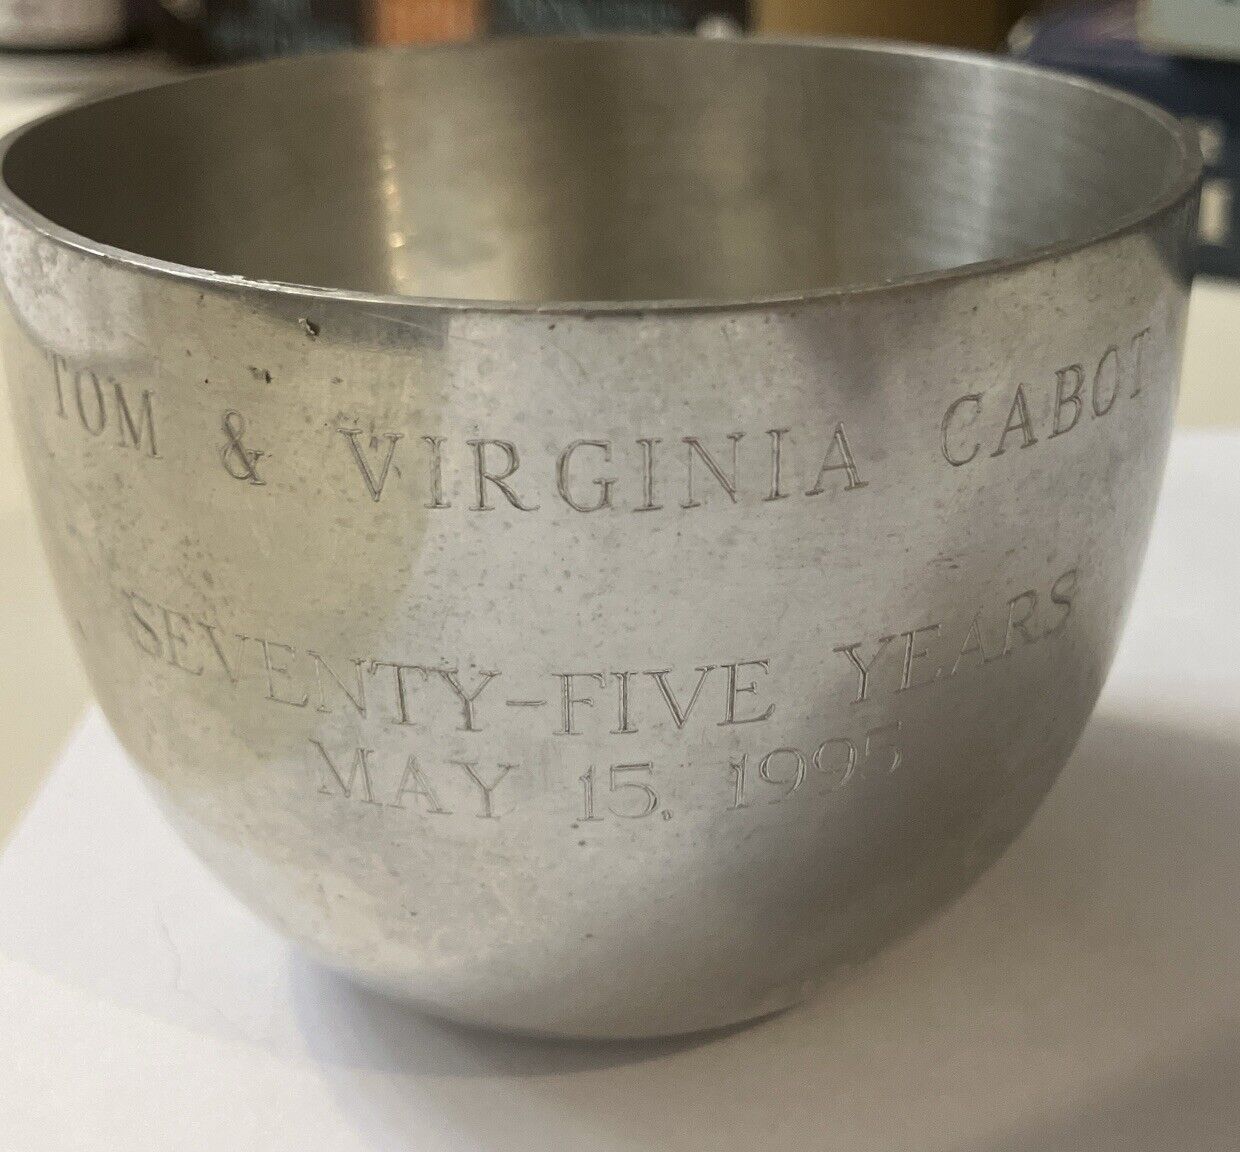 Rare Pewter Cup from Thomas Dudley Cabot’s 75th Anniversary Historical Artifact